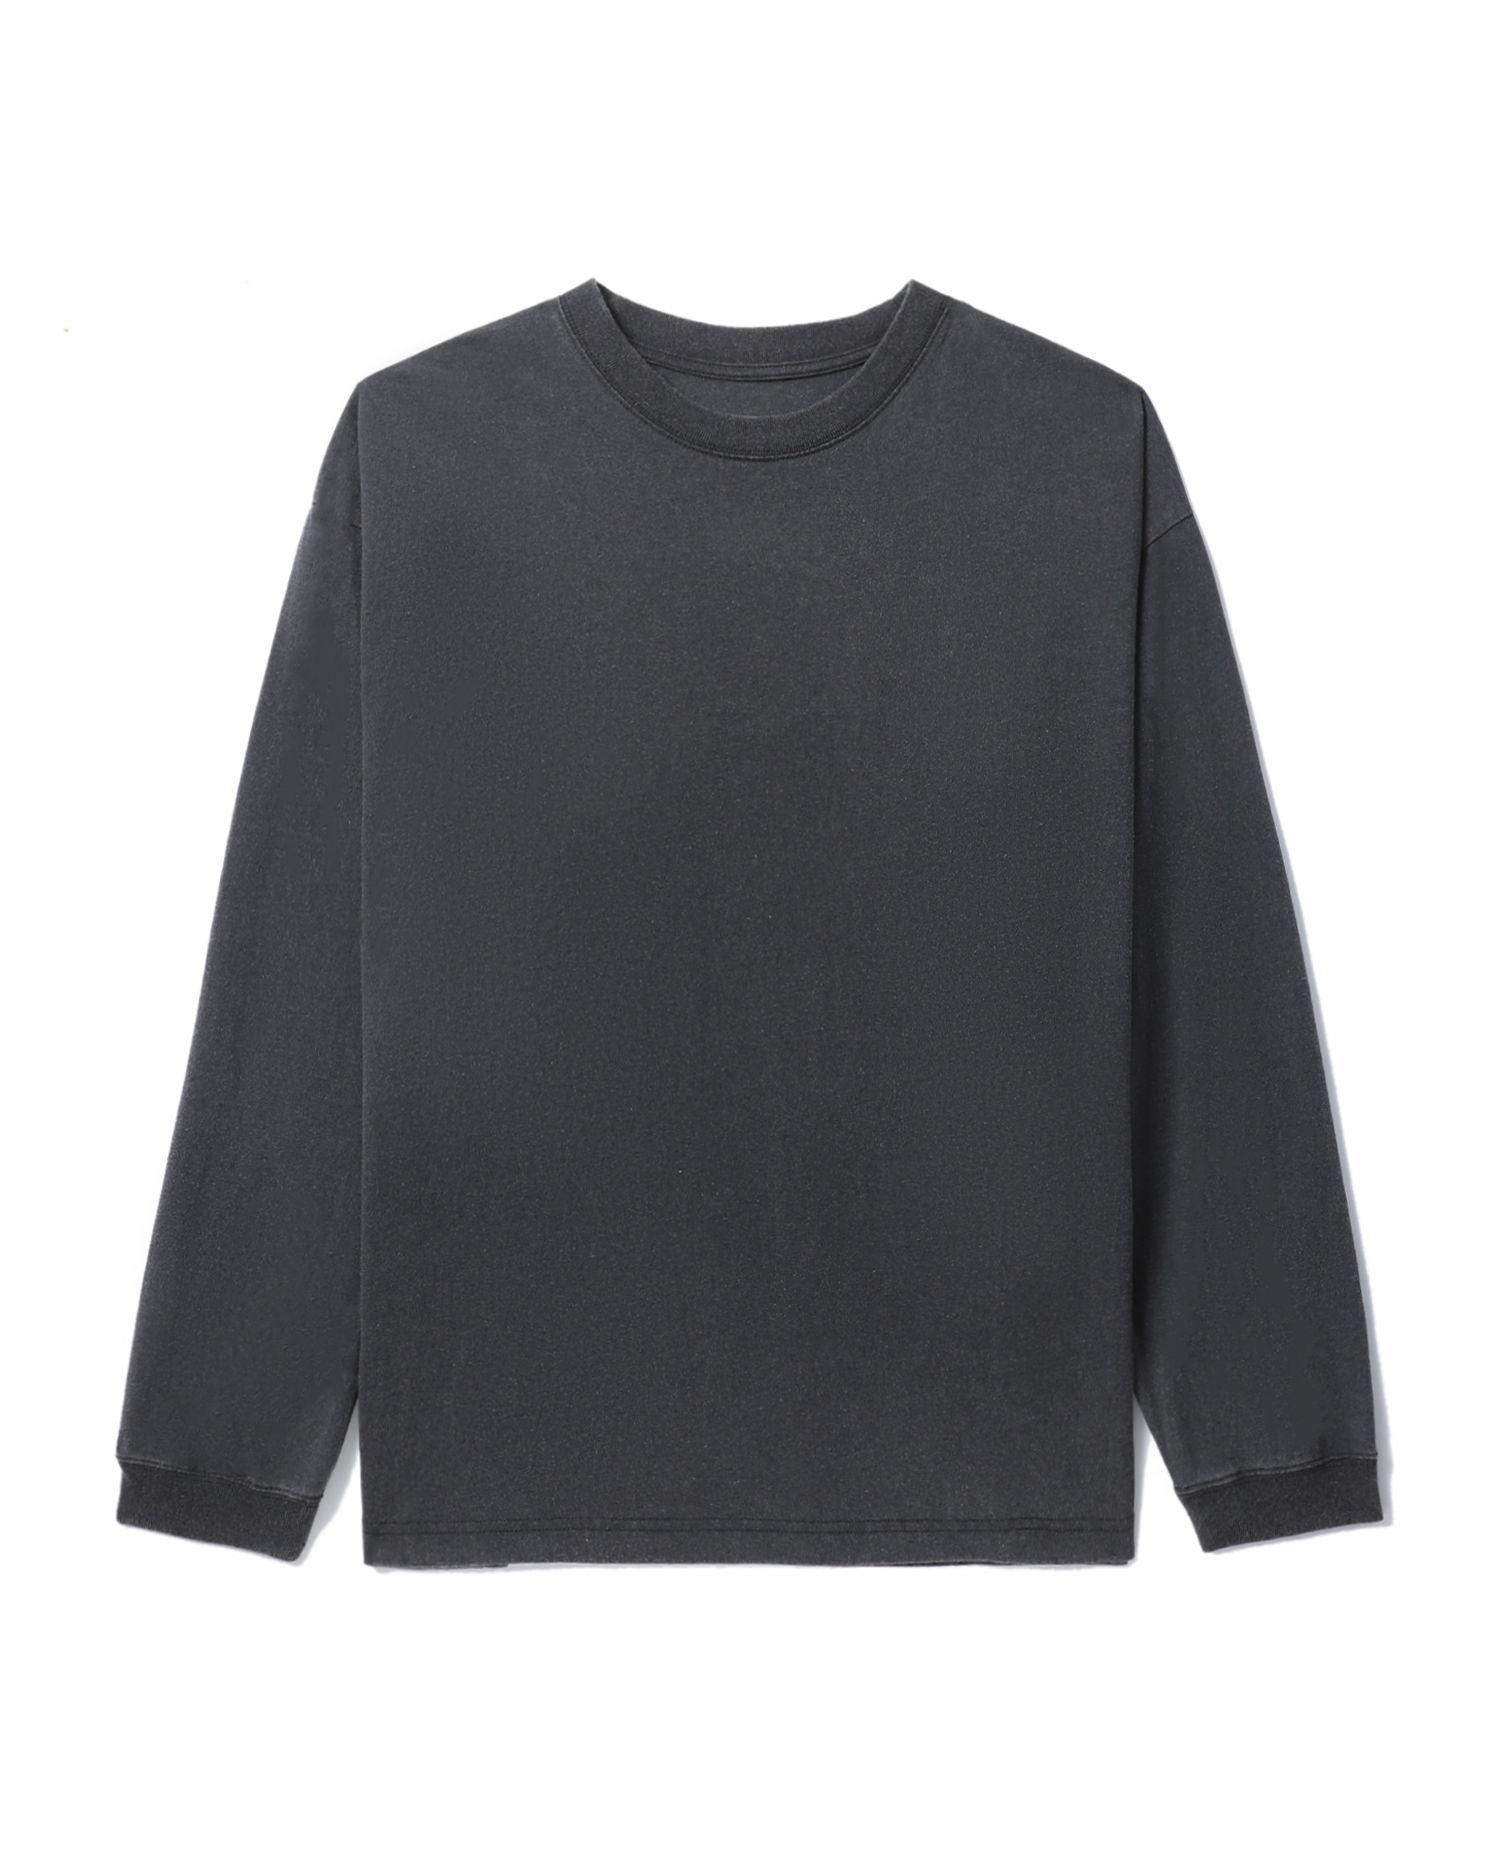 Relaxed long sleeve tee by BEAMS T